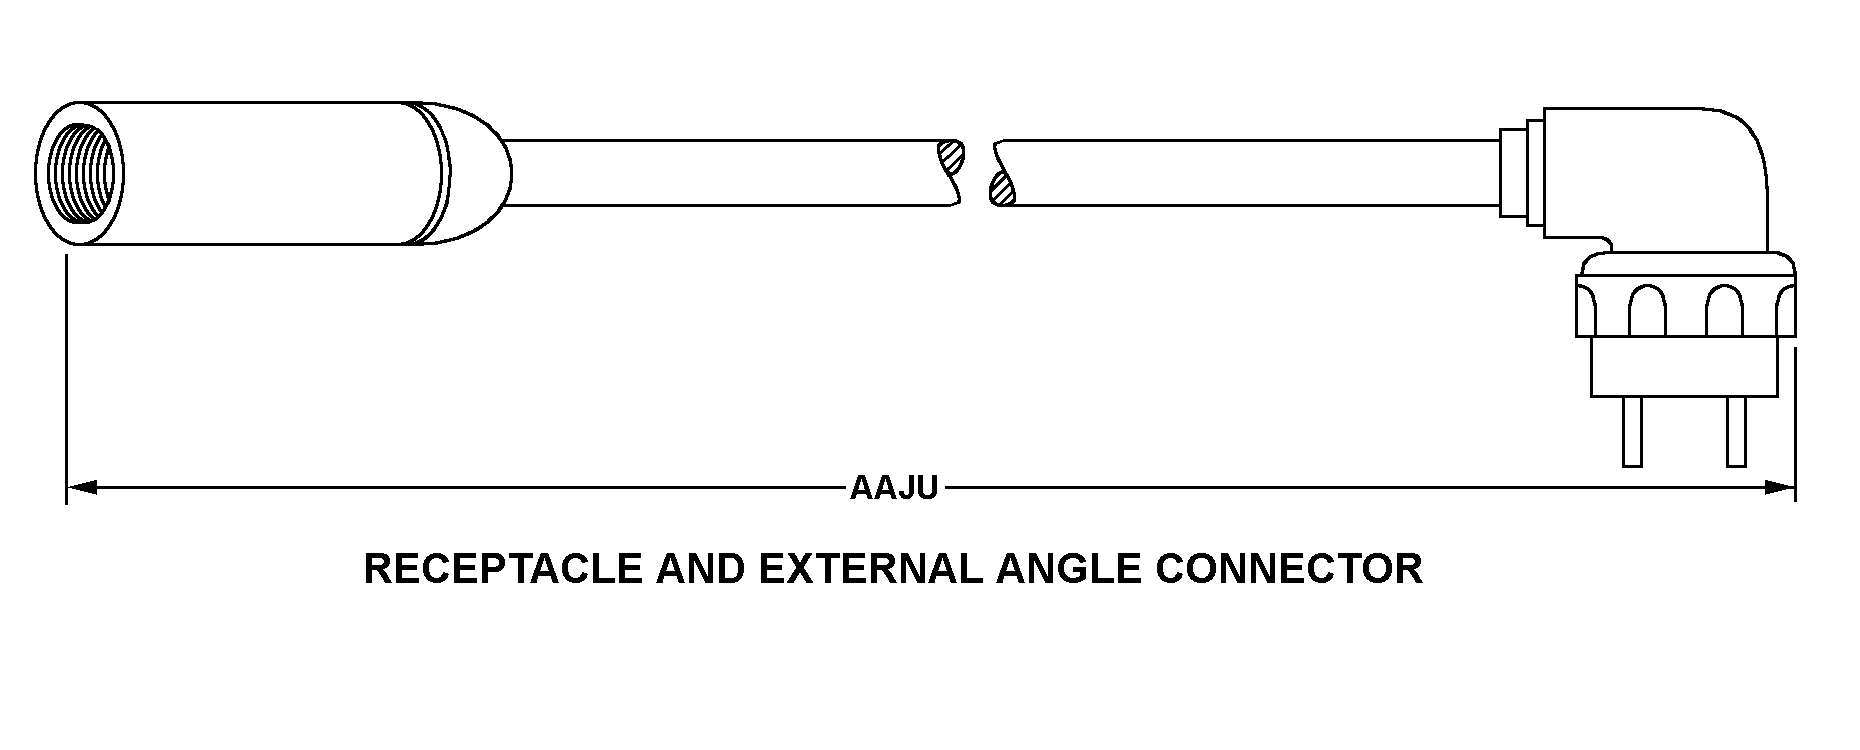 RECEPTACLE AND EXTERNAL ANGLE CONNECTOR style nsn 5995-01-071-5134